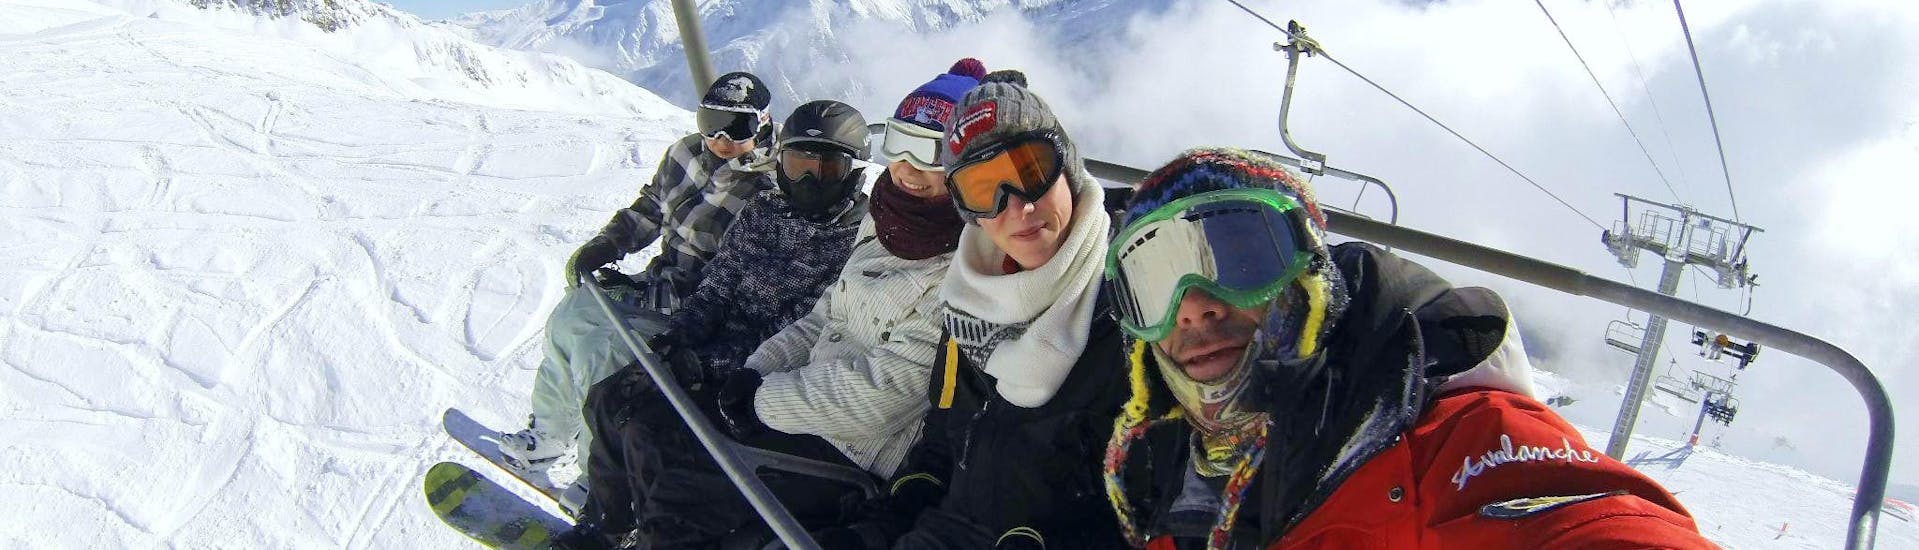 A group of snowboarders is sitting in a chairlift bringing them to the top of the mountain where they will start their Snowboarding Lessons for Adults - All Levels with the ESF Chamonix.